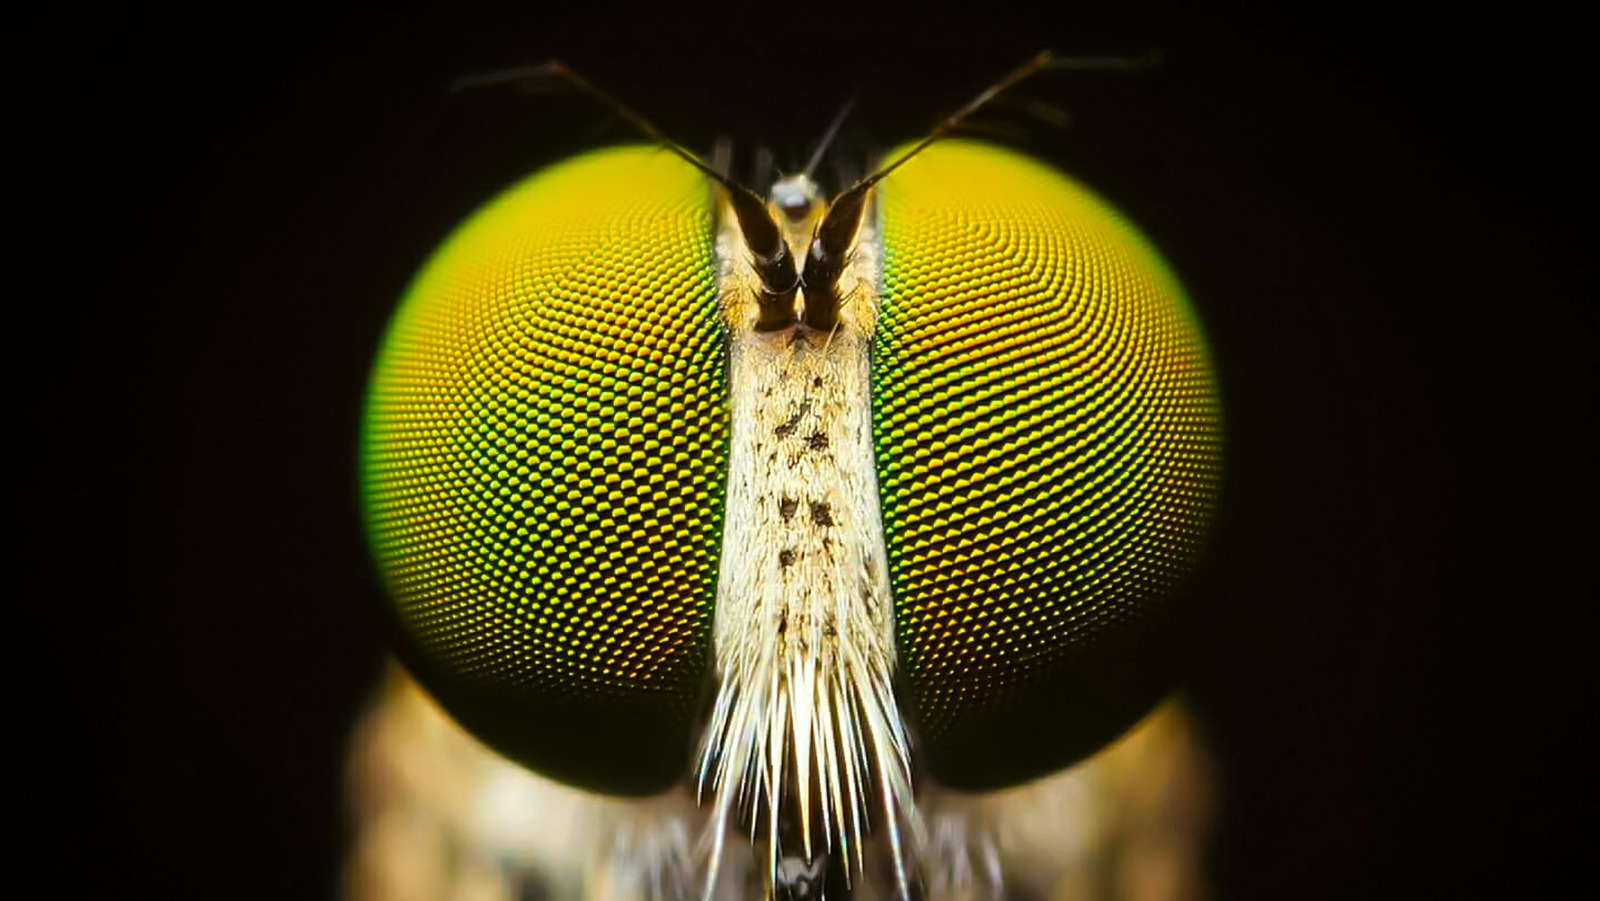 This Is What The Compound Eye Of A Fly Actually Sees